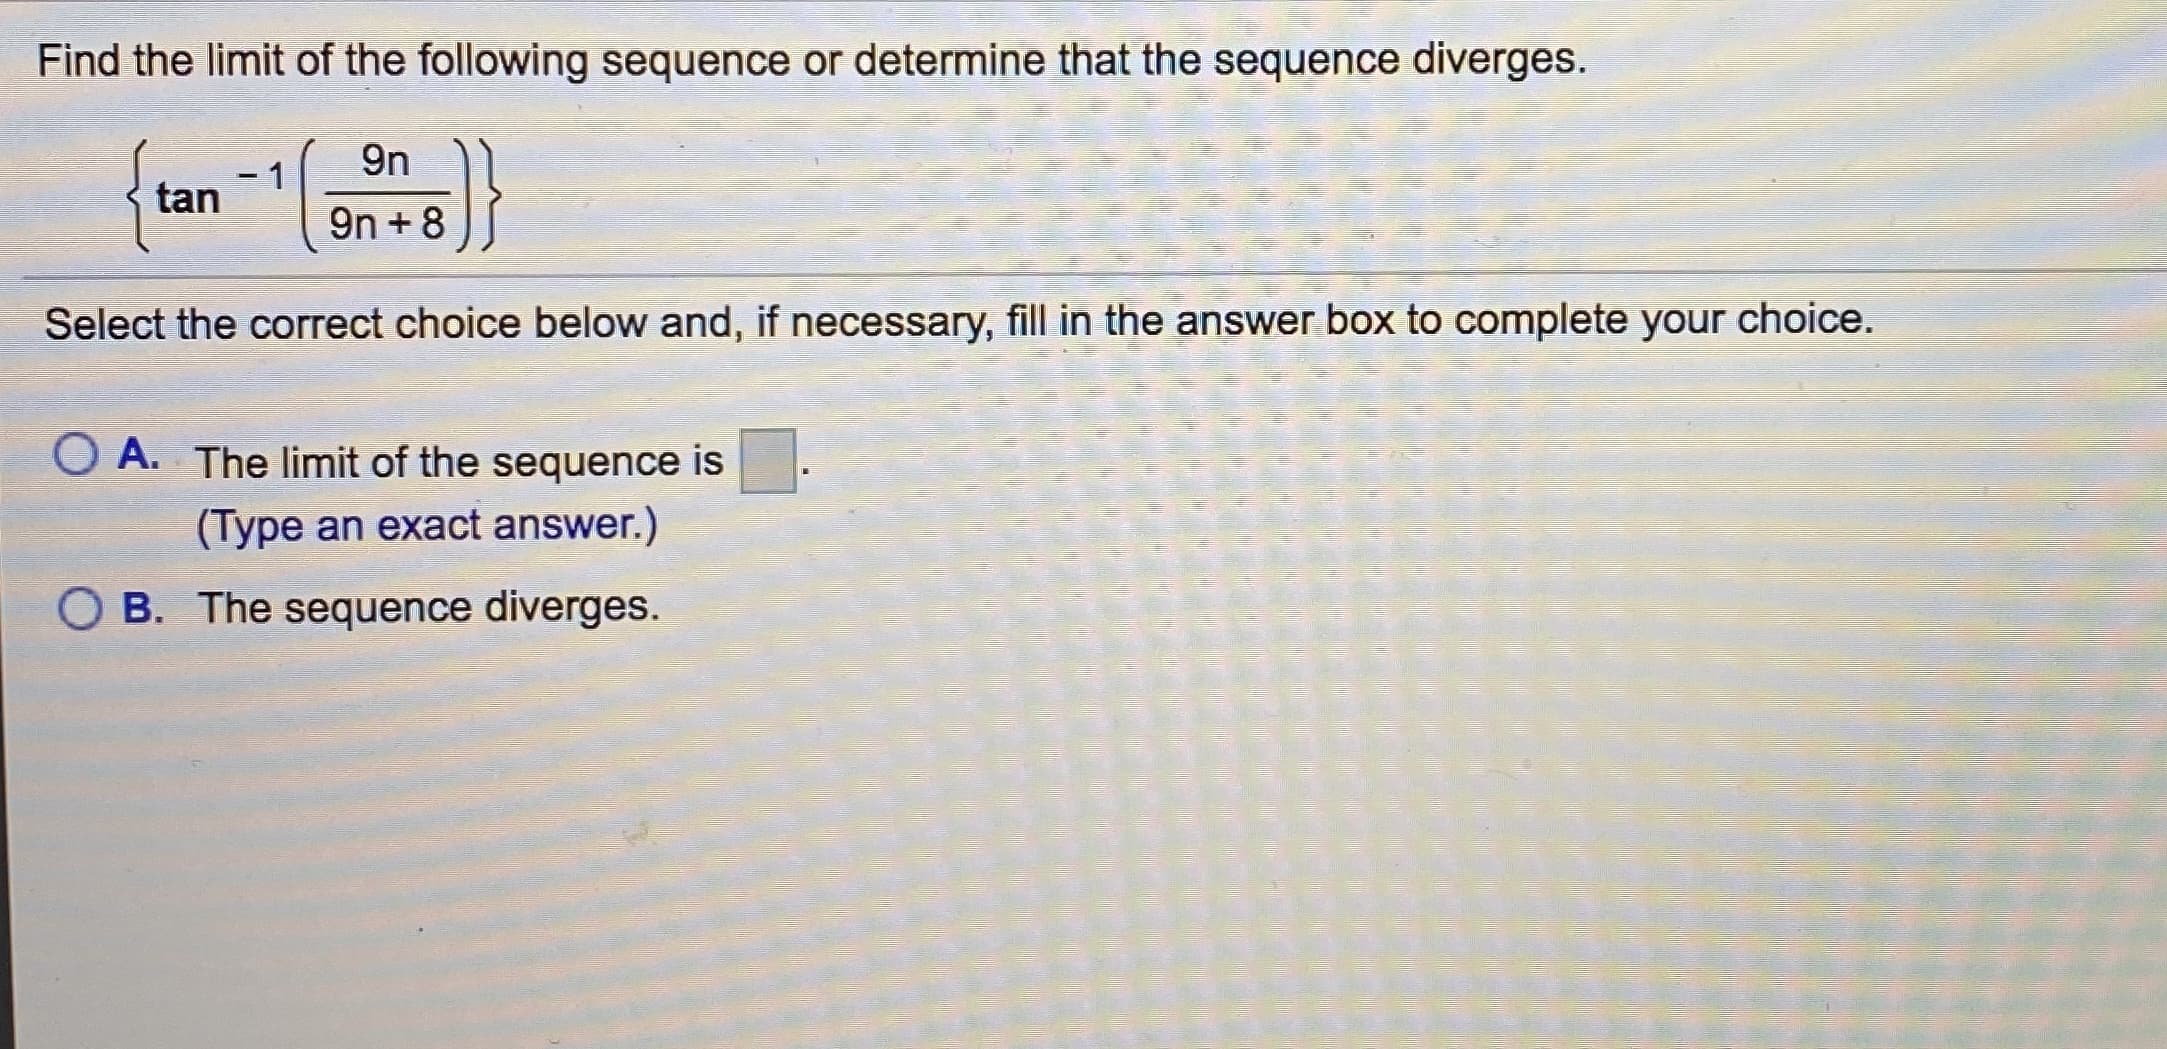 Find the limit of the following sequence or determine that the sequence diverges.
{tan an+8
9n
-1
Select the correct choice below and, if necessary, fill in the answer box to complete your choice.
O A. The limit of the sequence is
(Type an exact answer.)
OB. The sequence diverges.
